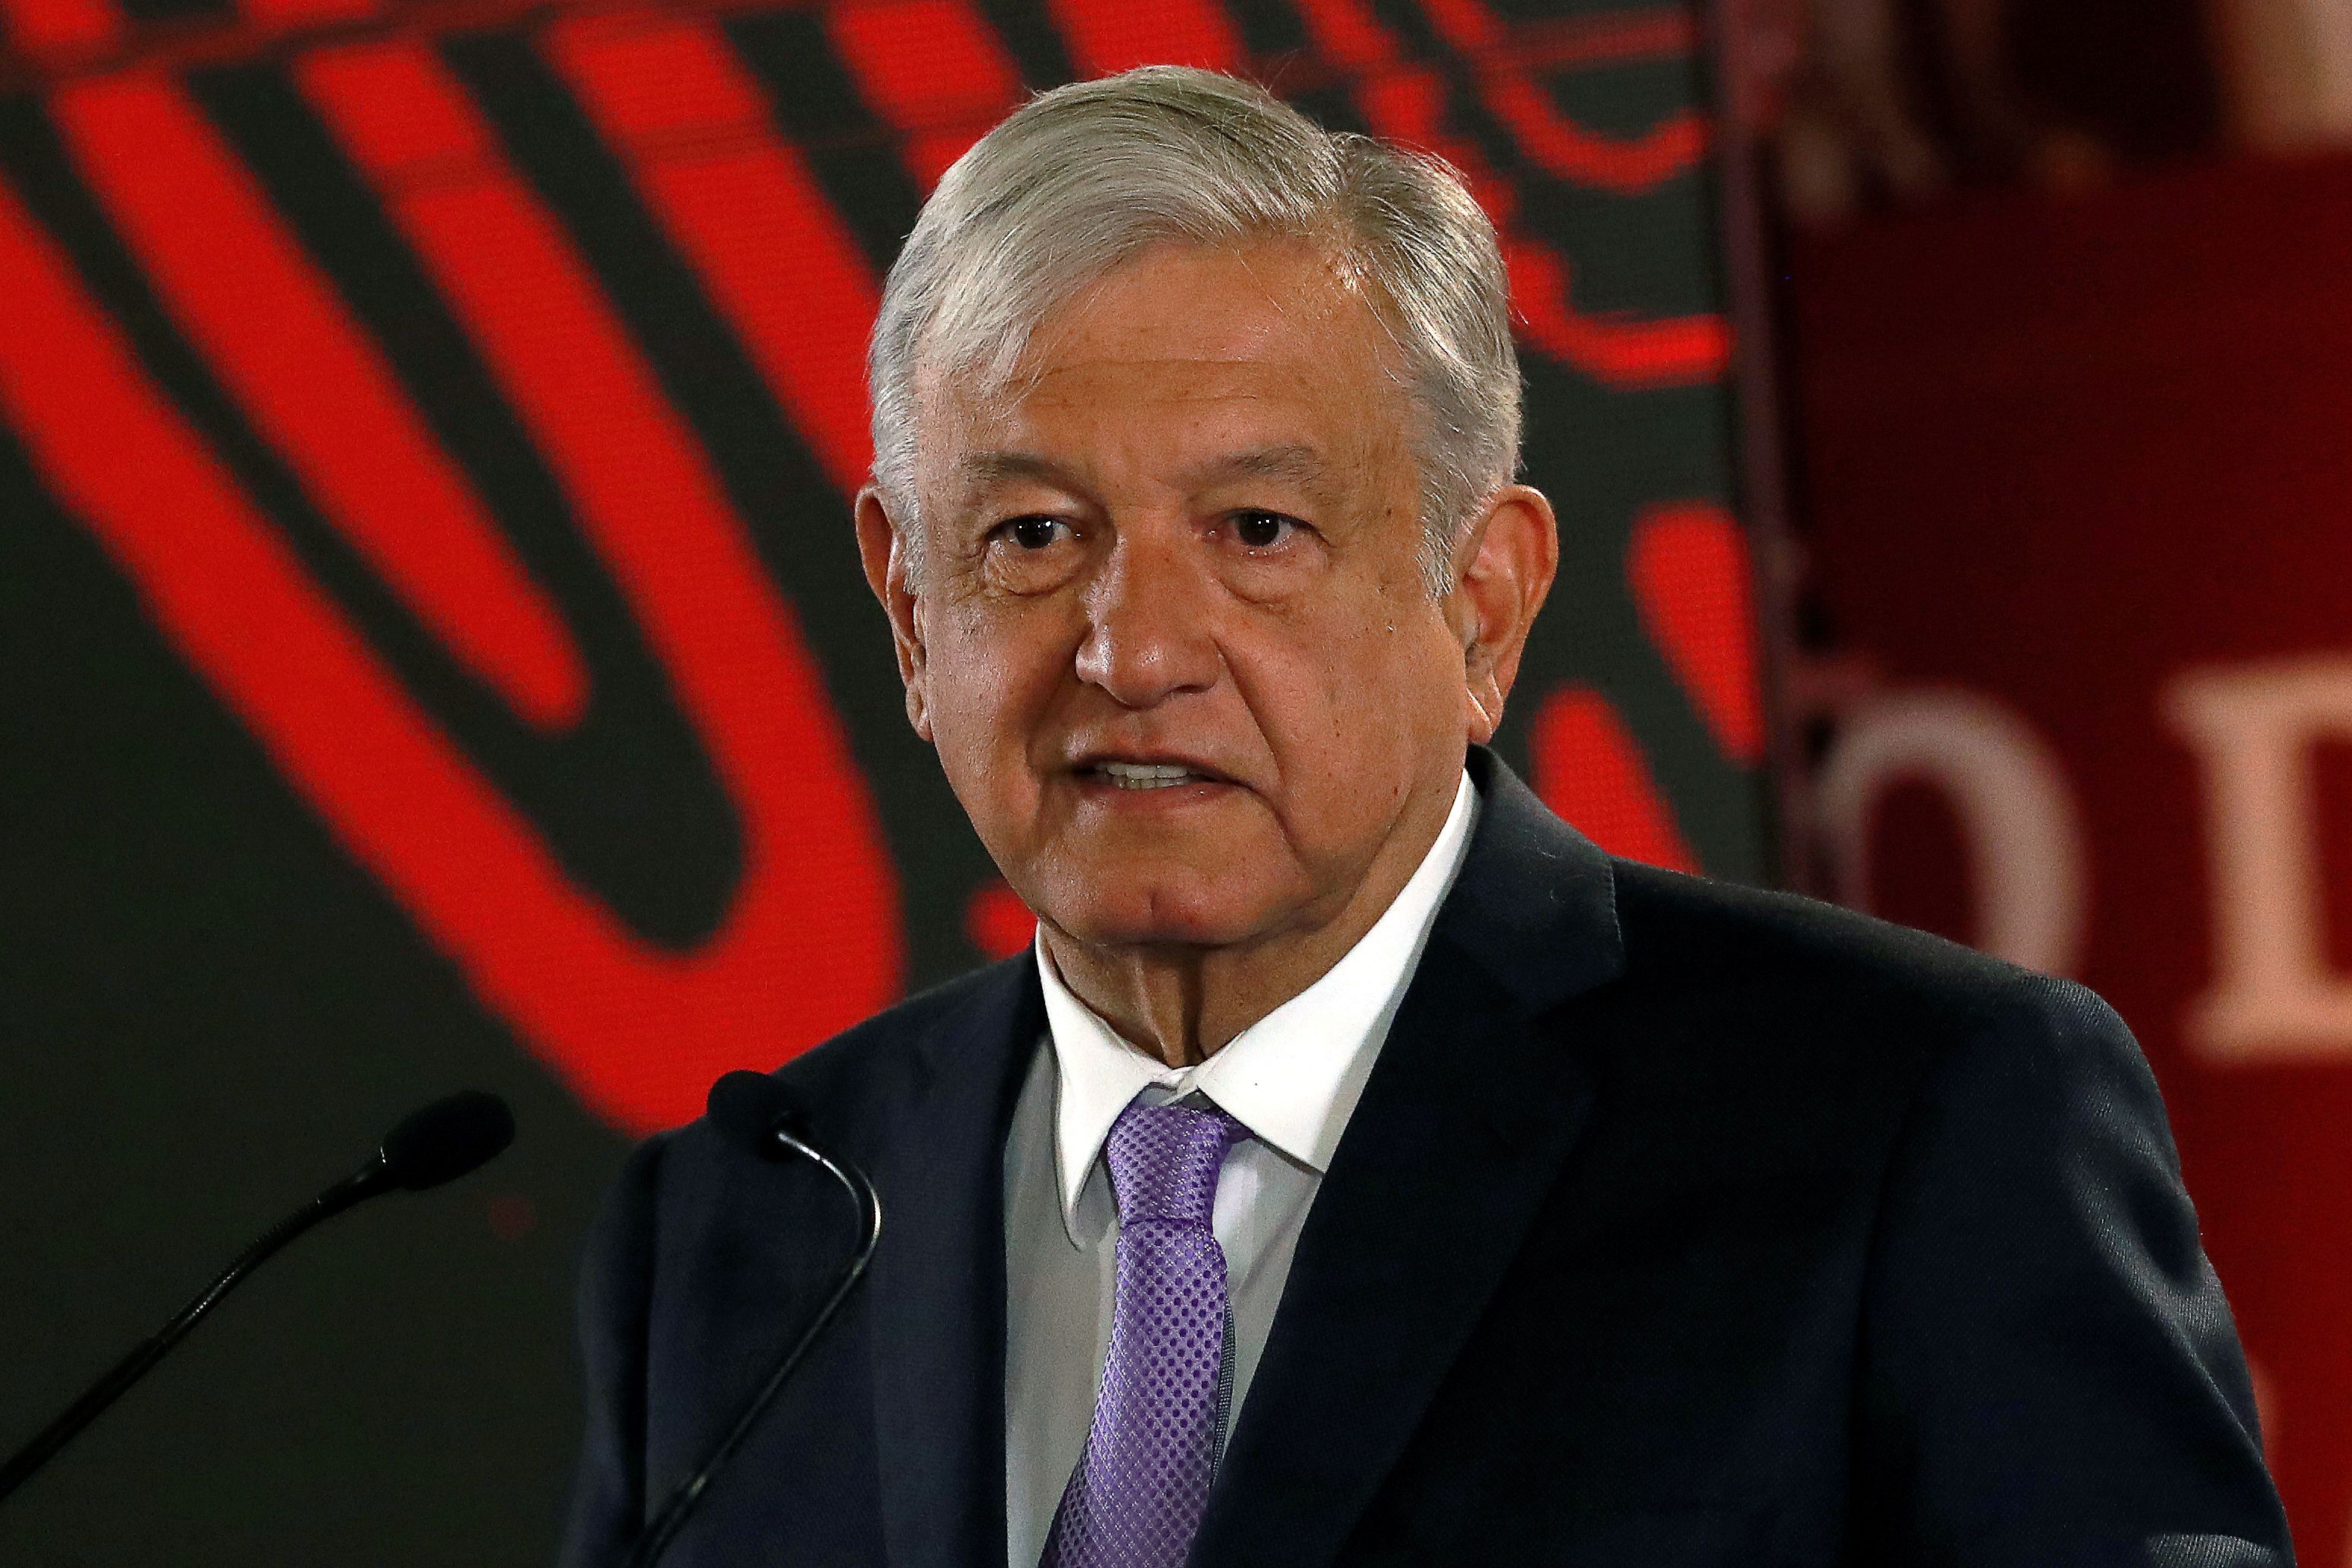 FILE PHOTO: Mexico's President Andres Manuel Lopez Obrador speaks during a news conference to announce a plan to strengthen finances of state oil firm Pemex, at the National Palace in Mexico City, Mexico February 15, 2019. REUTERS/Henry Romero/File Photo